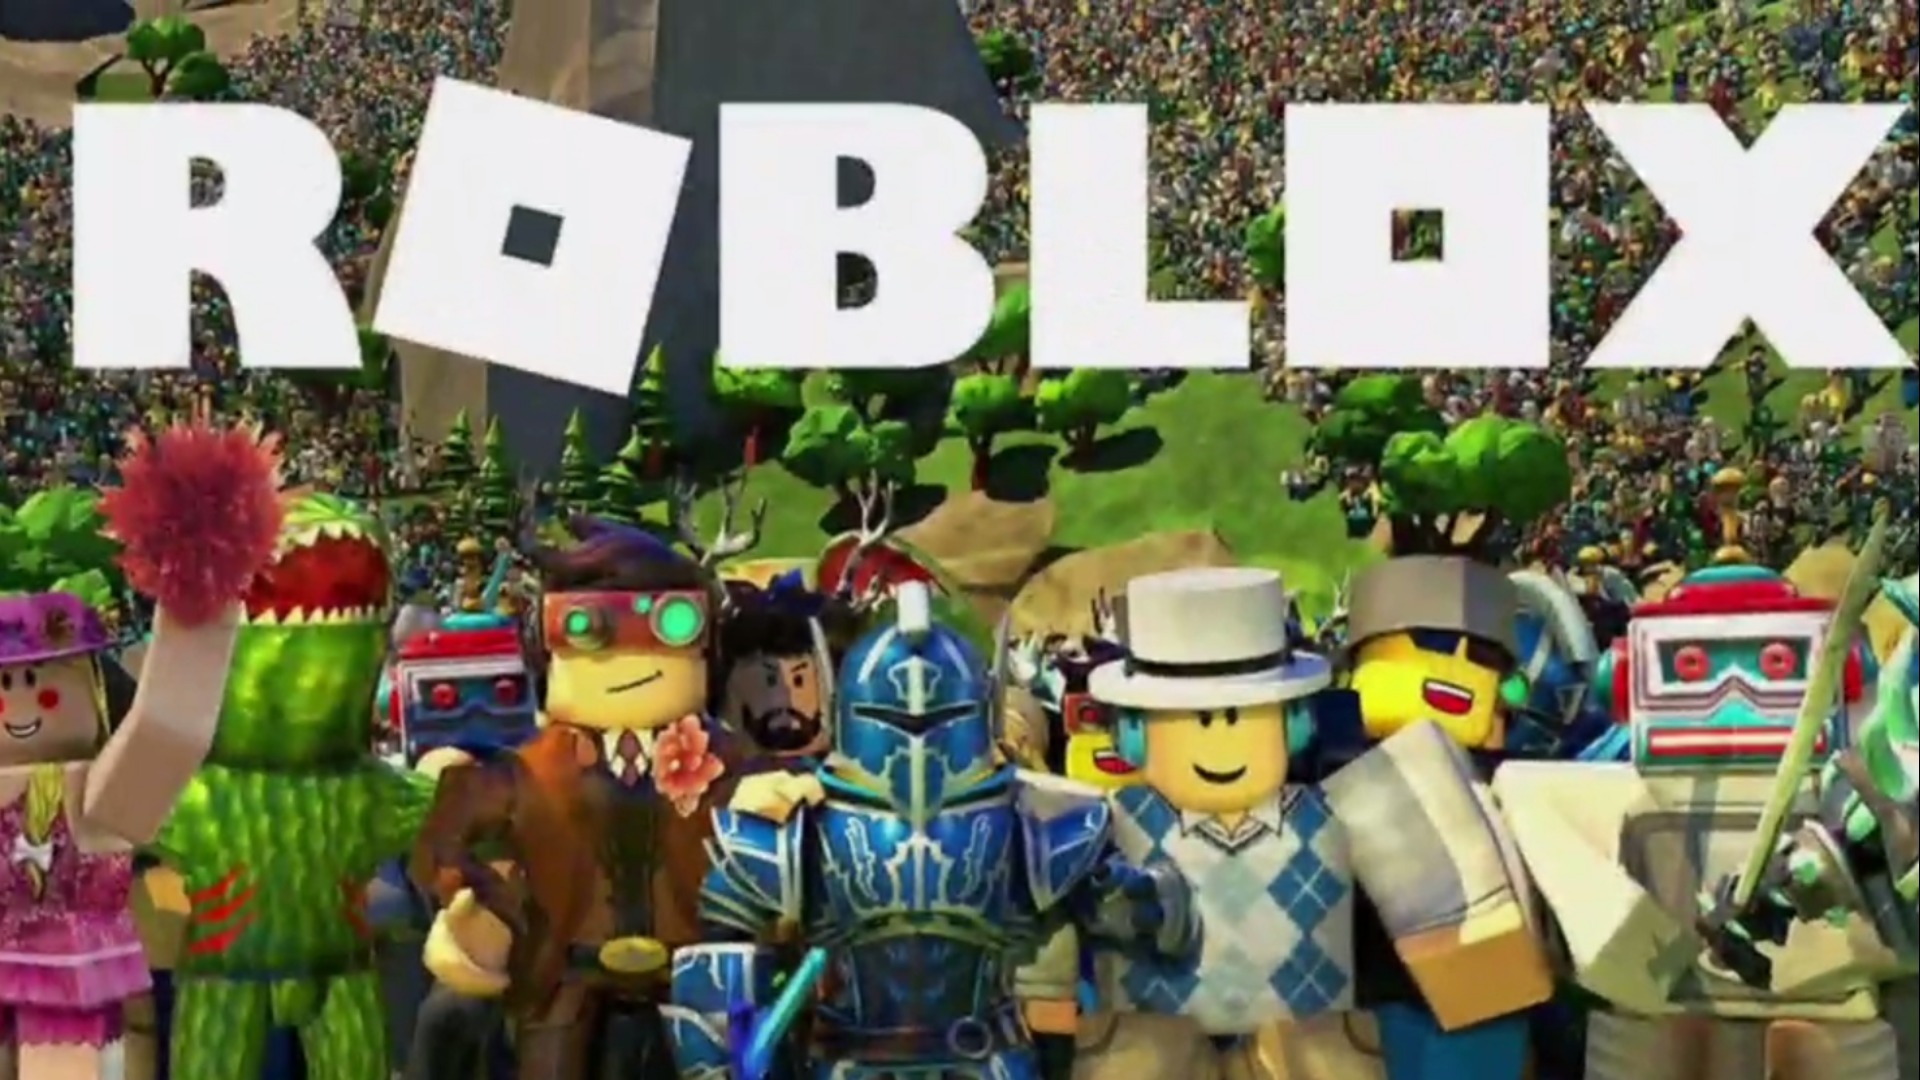 New Questions About Some Inappropriate Content On The Gaming Platform Roblox Video - roblox ben 10000